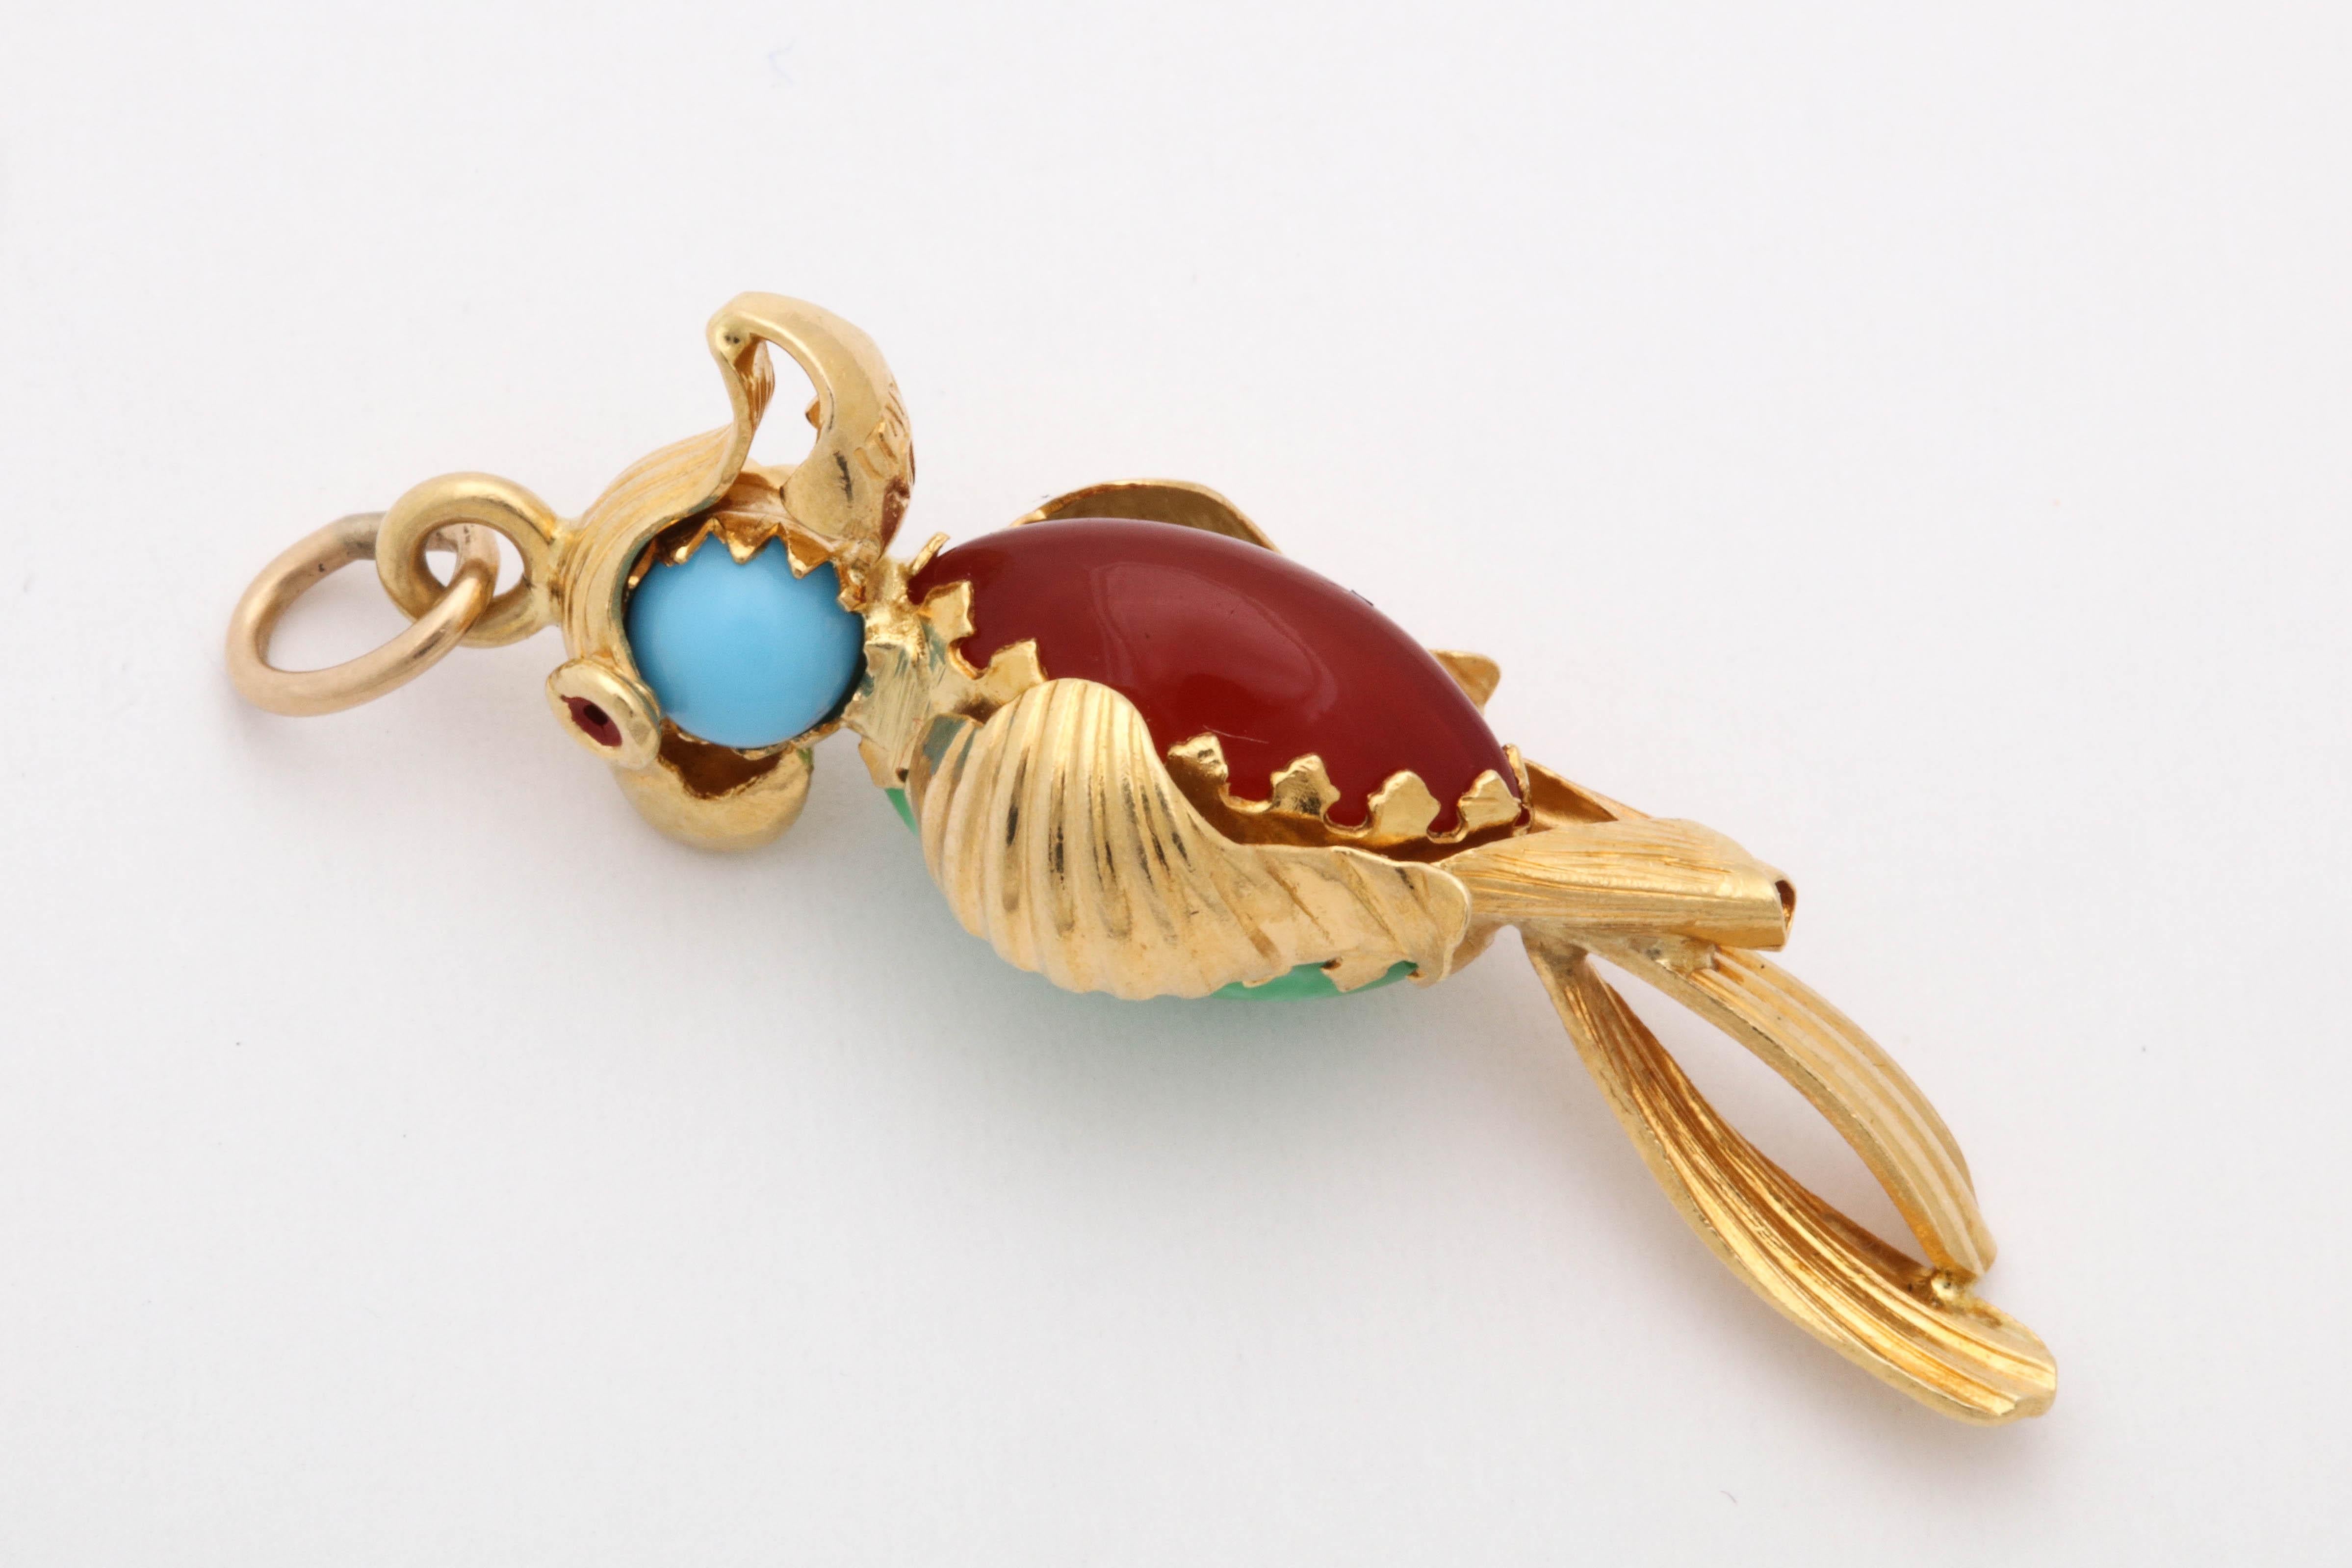 Marquise Cut Jade, Turquoise, Carnelian with Red Enamel Eyes Whimsical Gold Parrot Charm